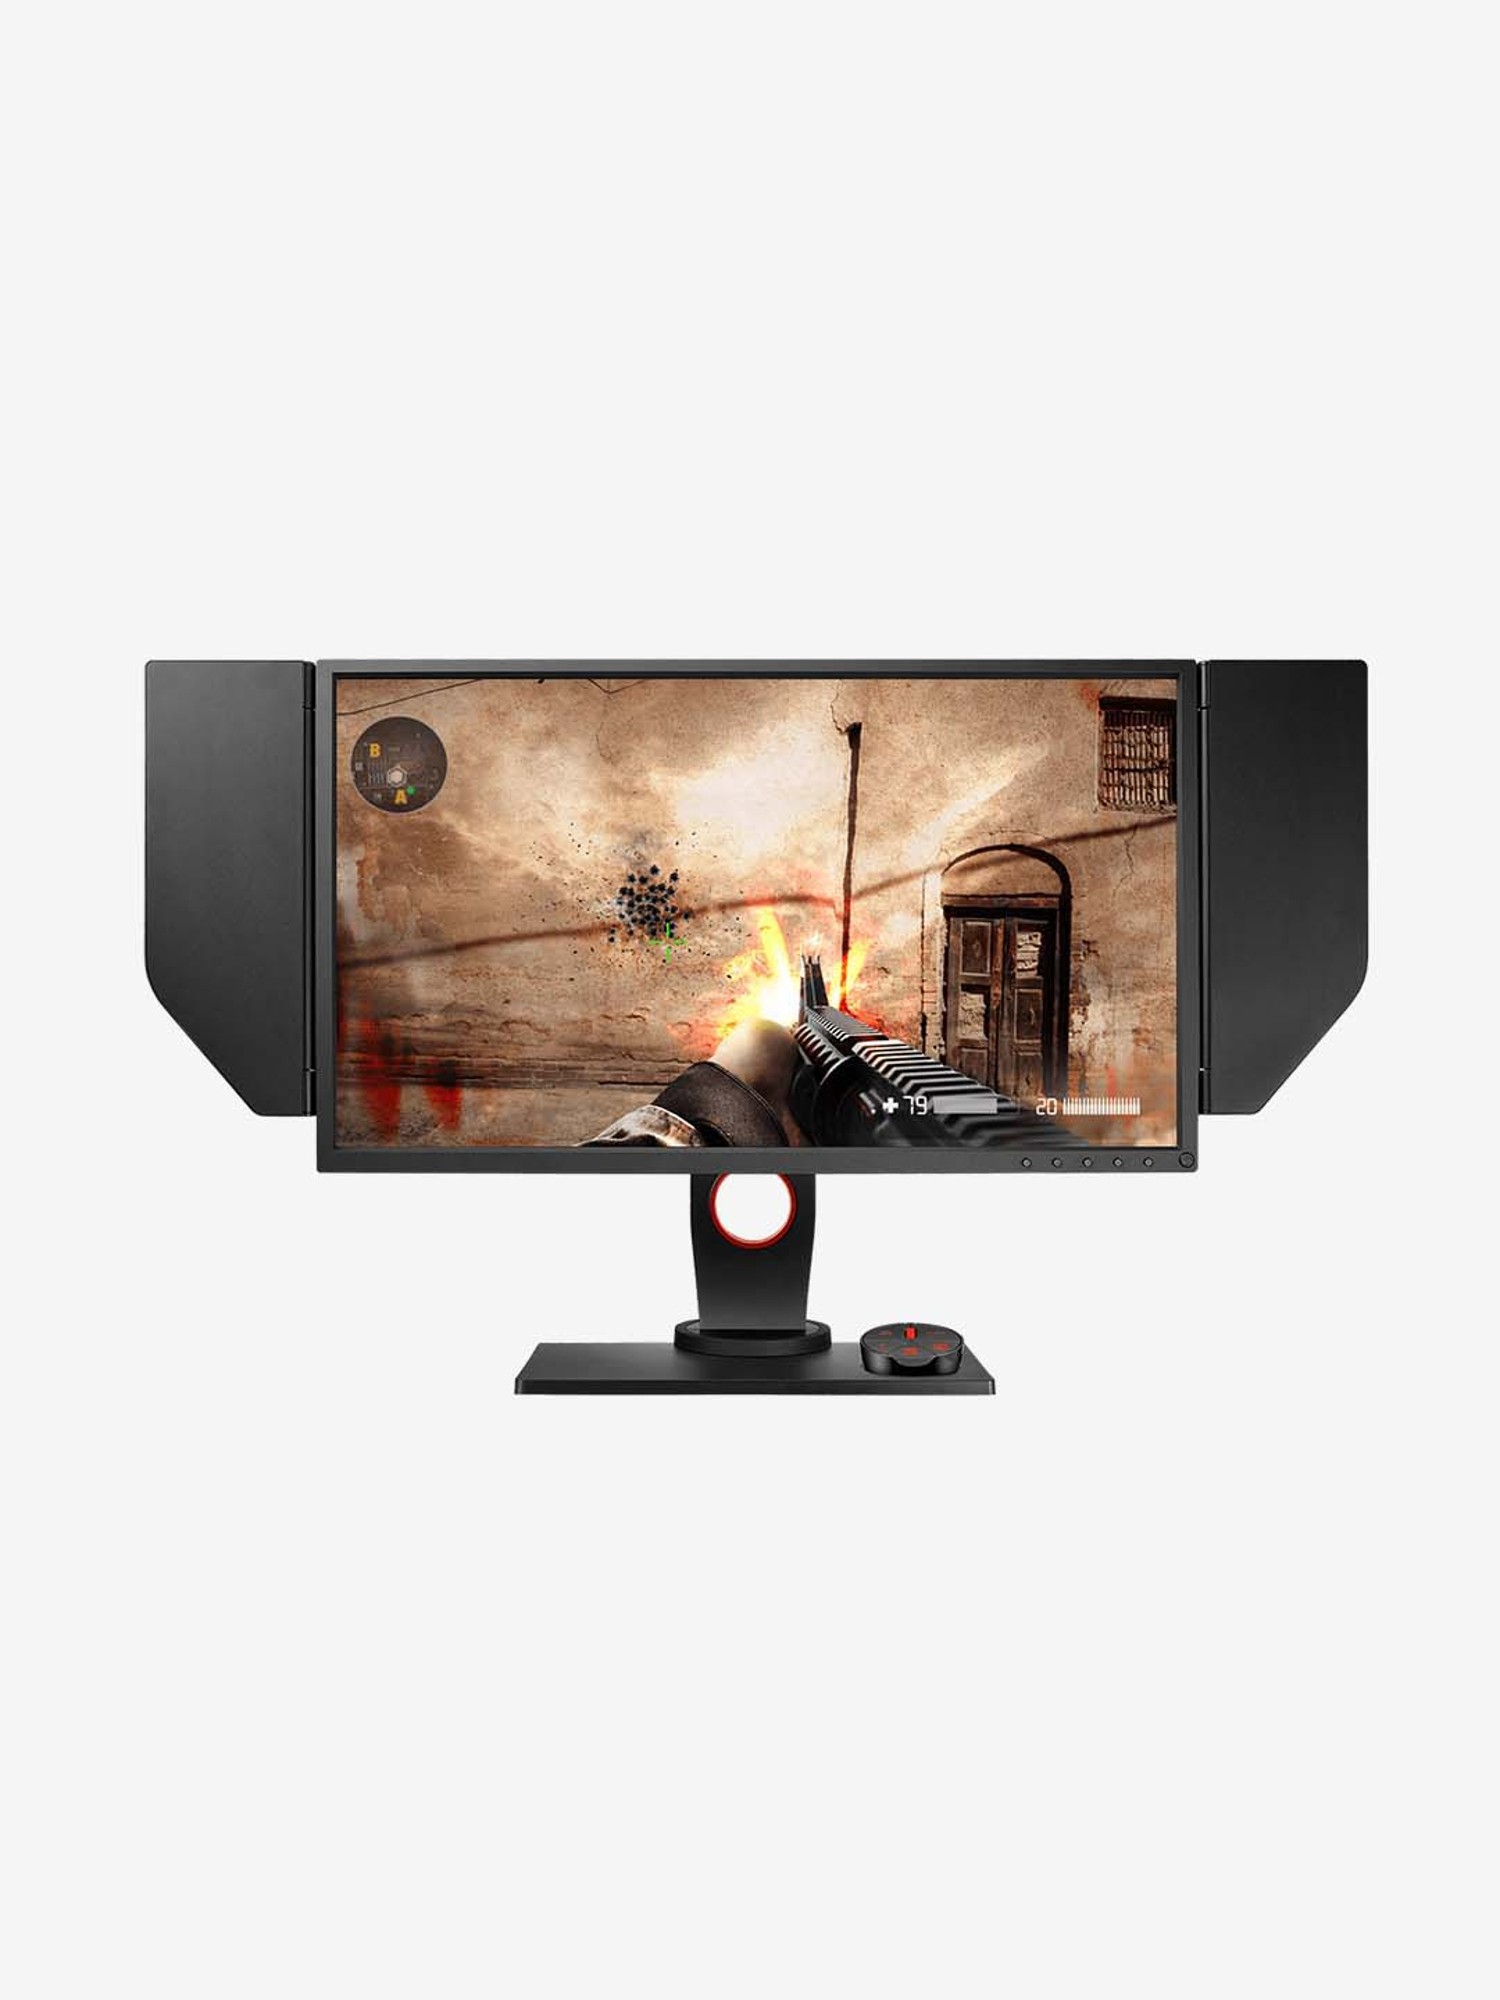 Buy Benq Zowie Xl2546 62 23cm 24 5 Inch Full Hd Esports Gaming Monitor Black Online At Best Prices Tata Cliq